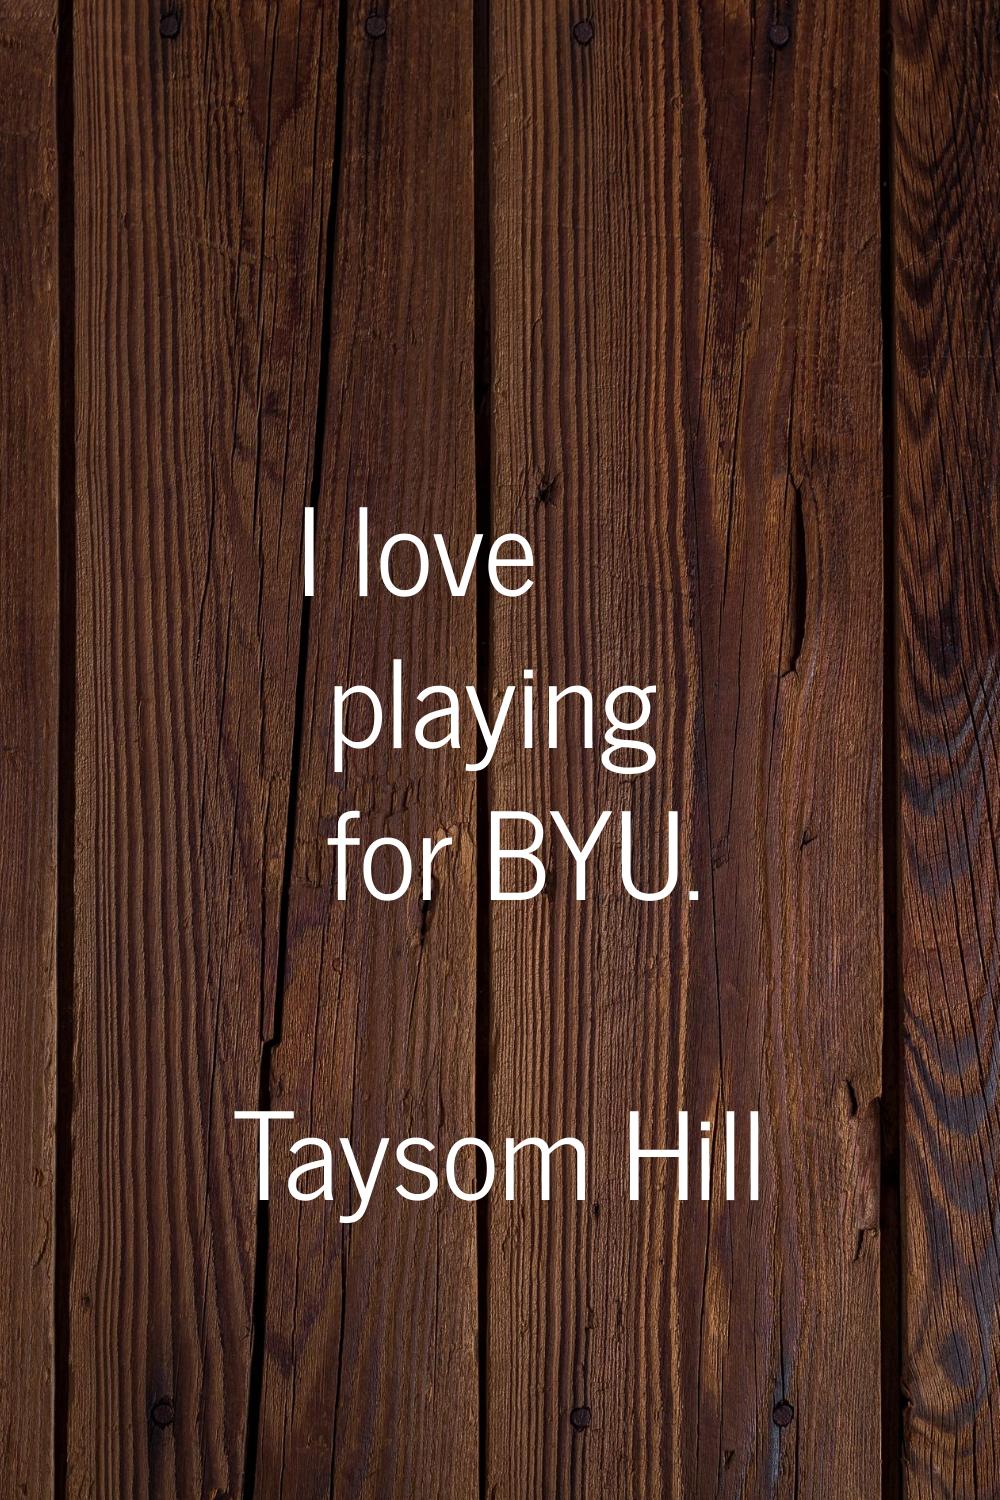 I love playing for BYU.